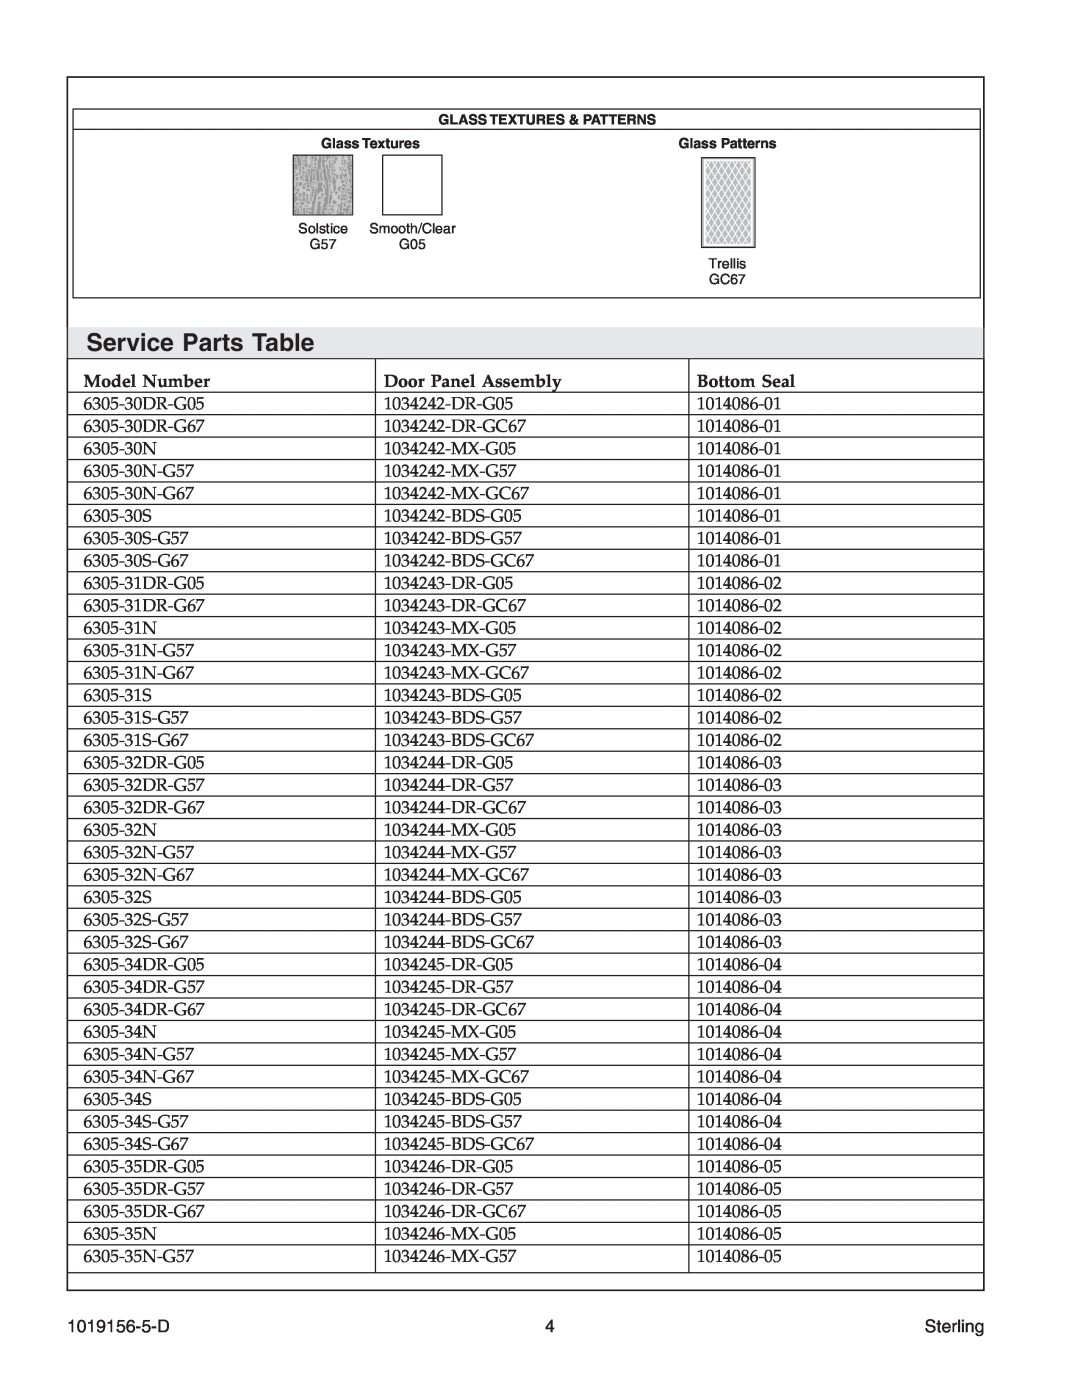 Sterling Plumbing 6305 Series Service Parts Table, Model Number, Door Panel Assembly, Bottom Seal, 1019156-5-D, Sterling 